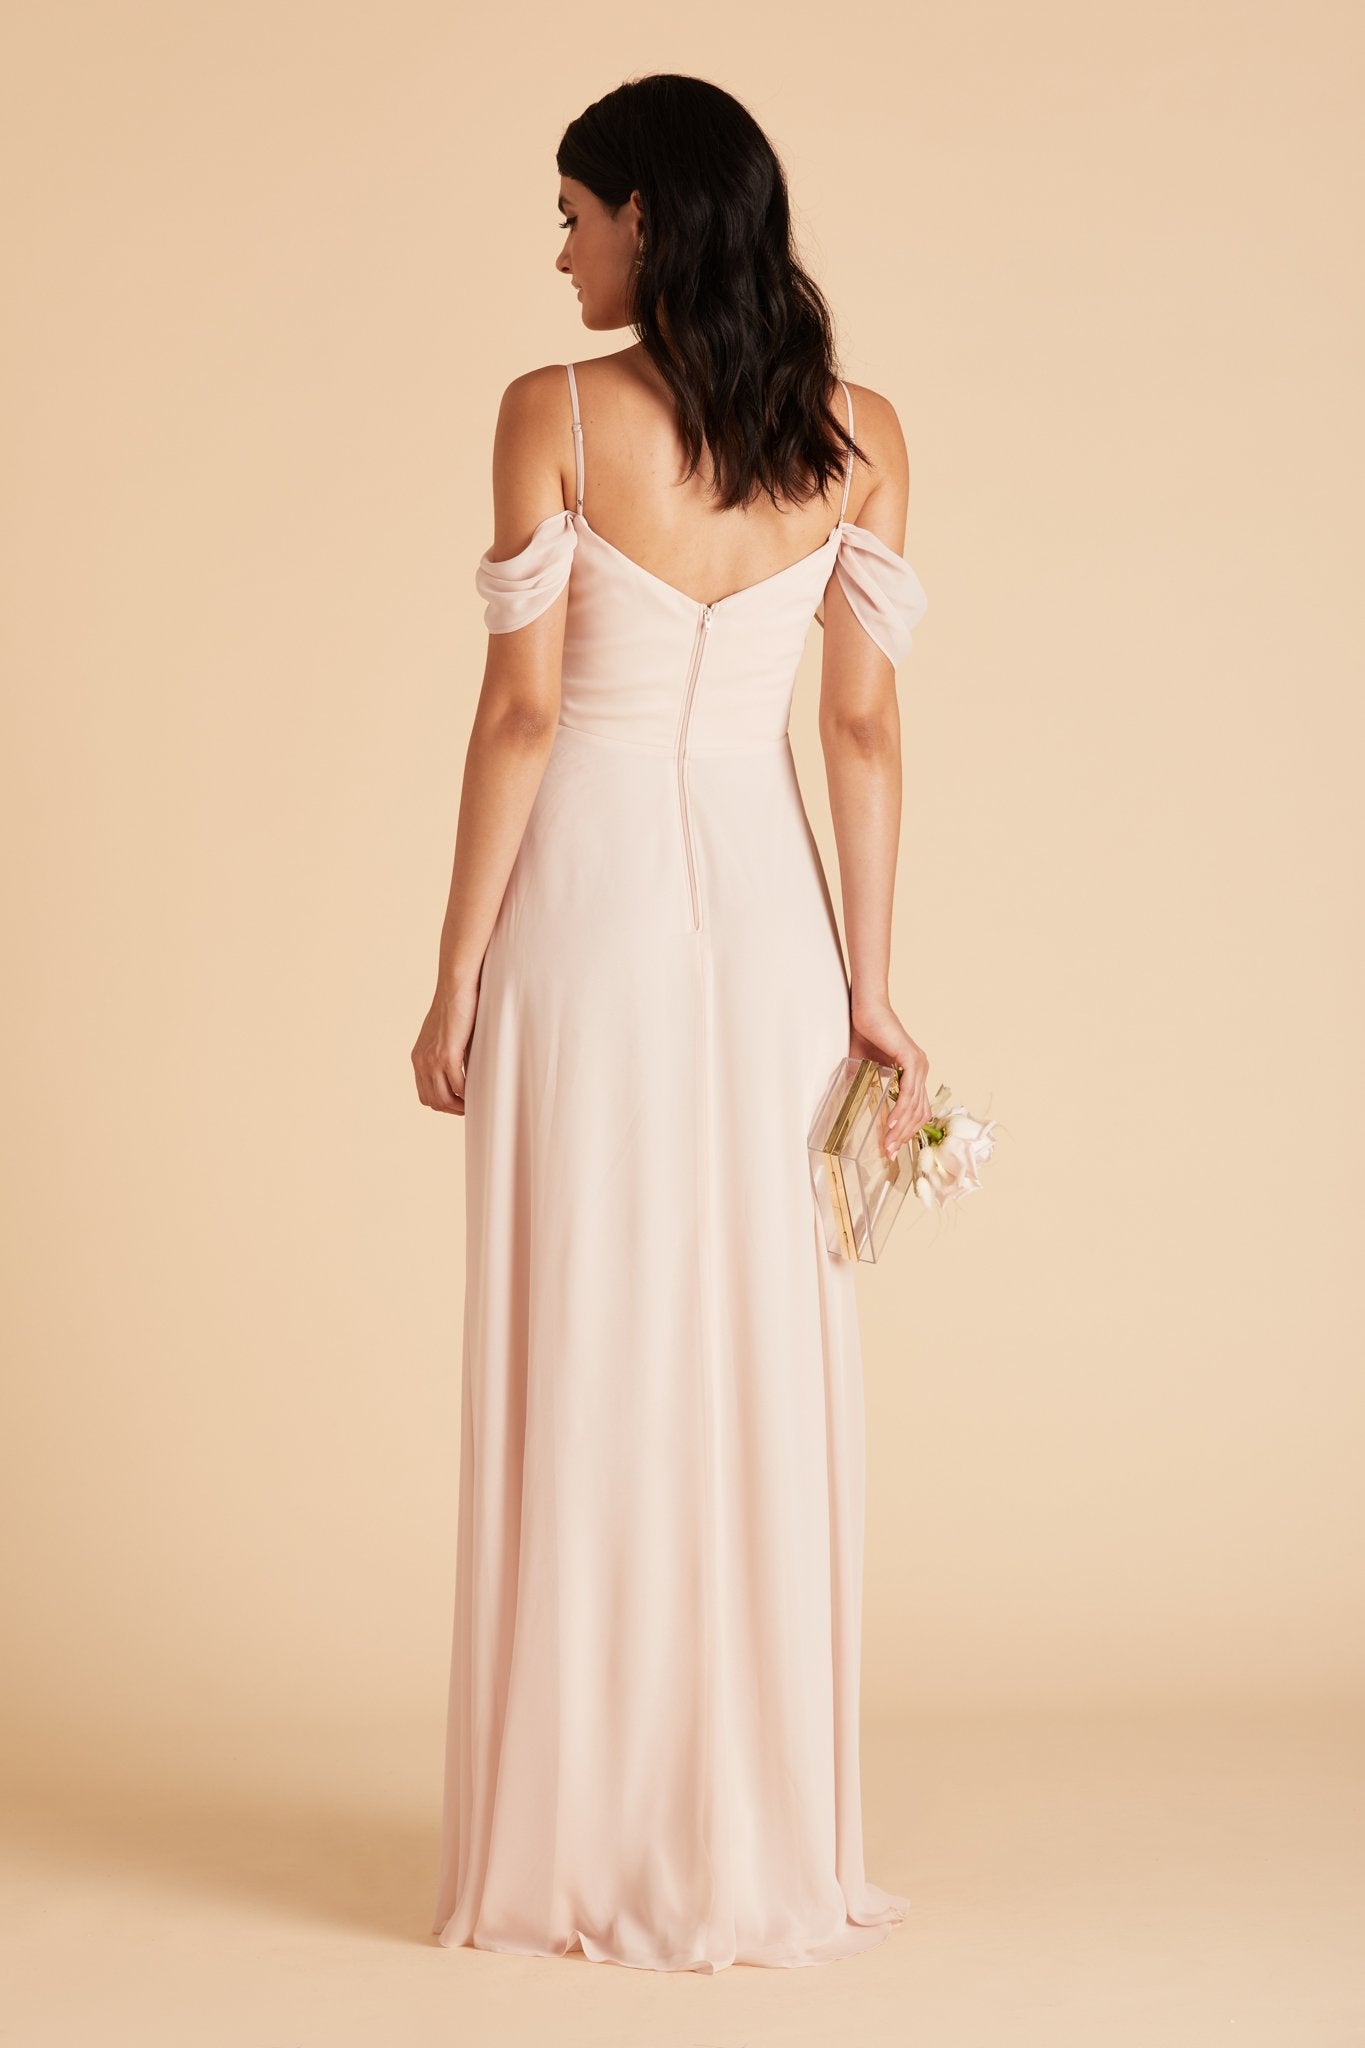 Devin convertible bridesmaids dress in pale blush chiffon by Birdy Grey, back view